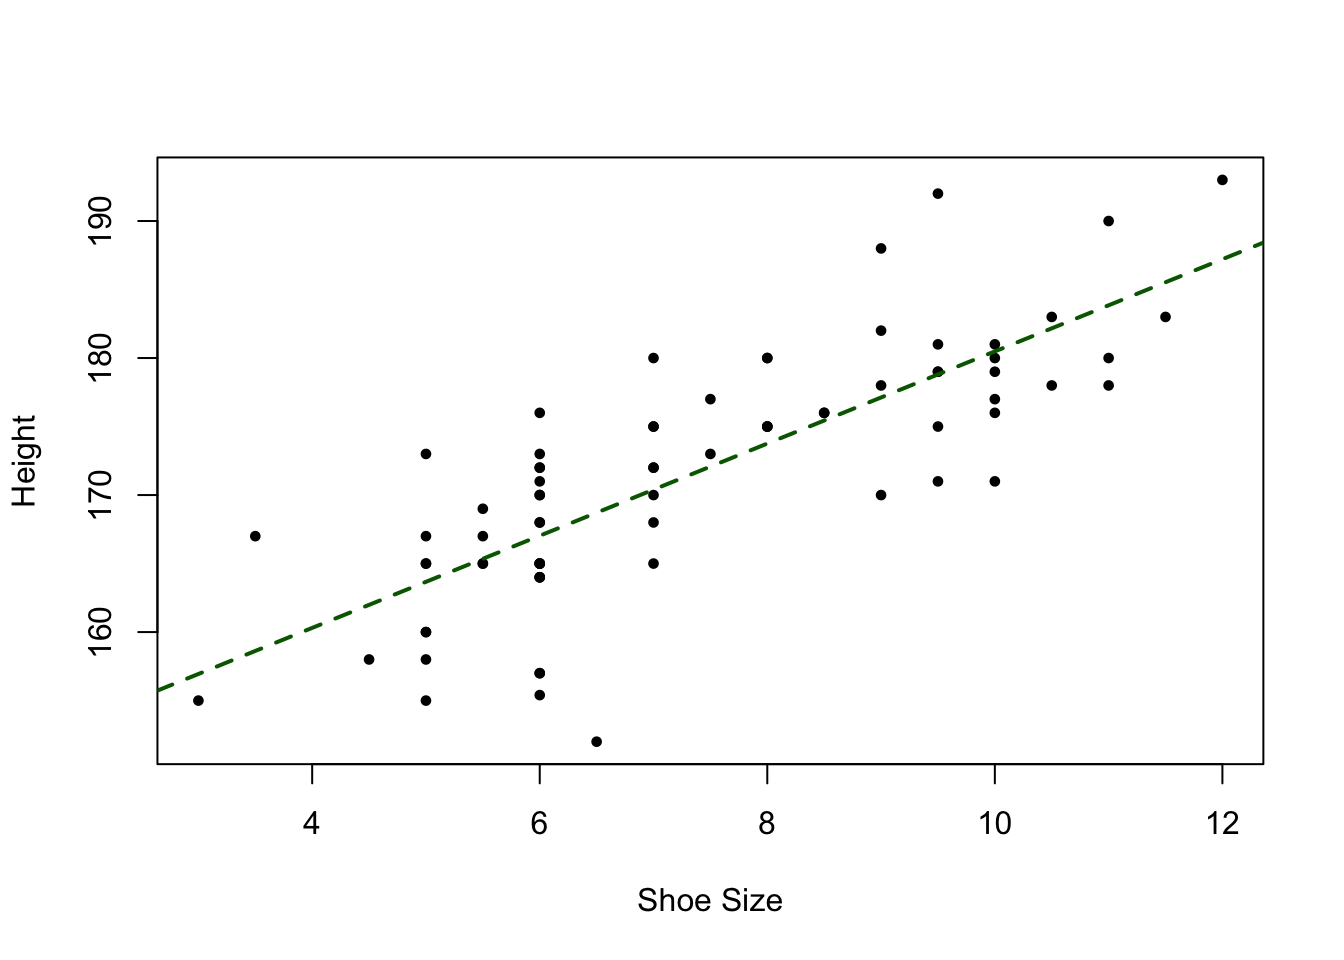 A plot of Shoe size against Height, with a trendline.